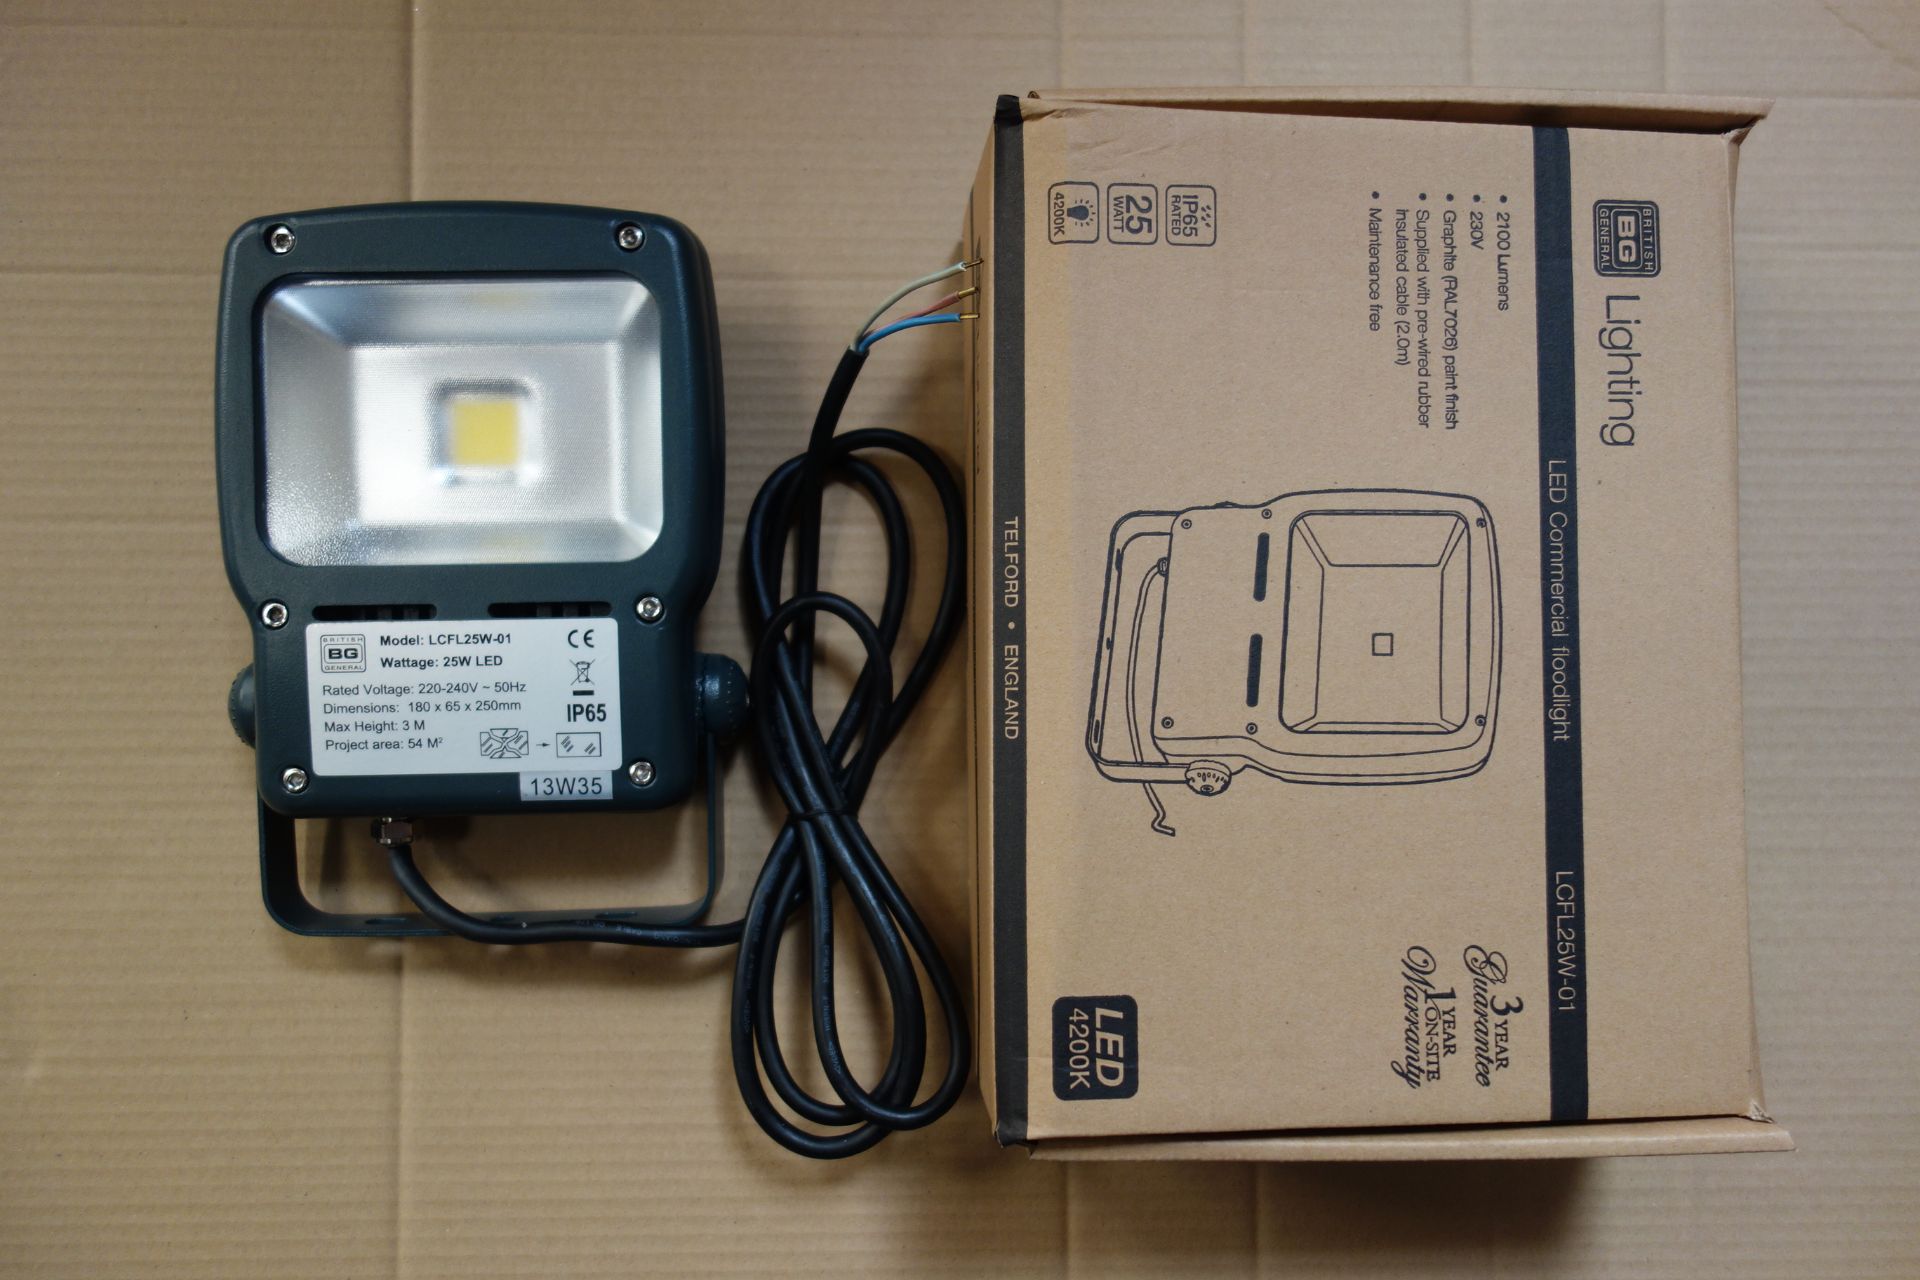 6 X British General LCFL25W-01 LED 25W Commercial Floodlight Graphile Finish C/W Rubber Insulated